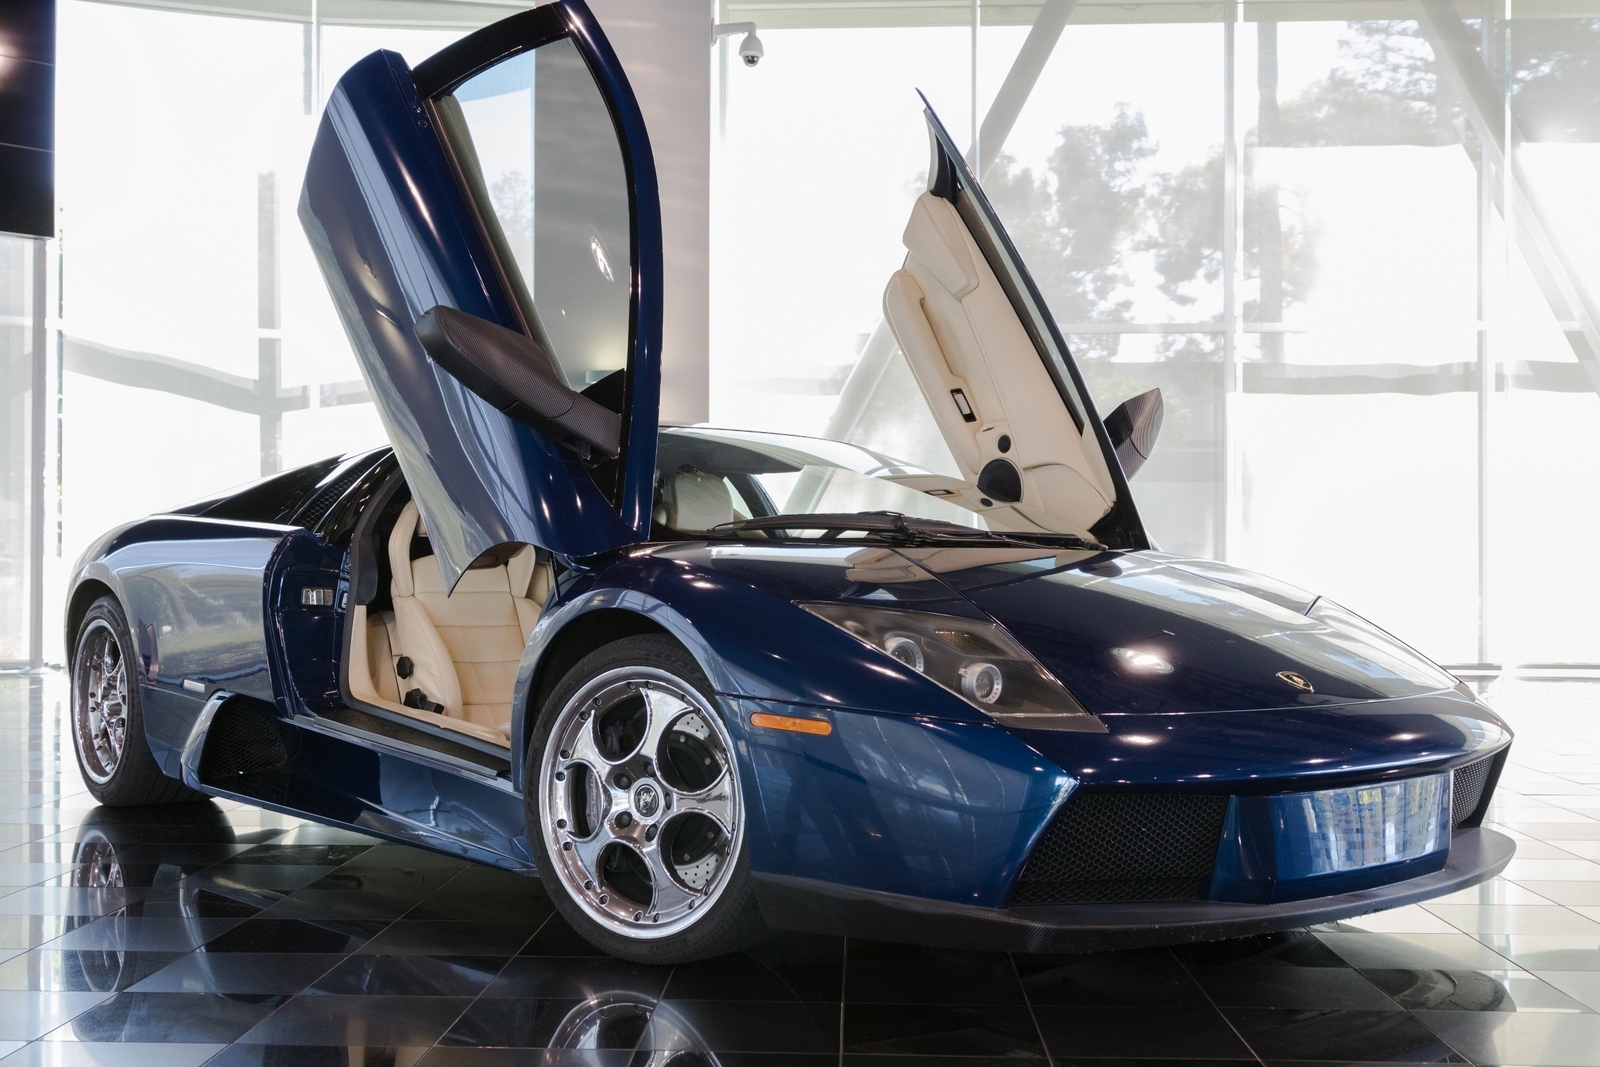 Used 2003 Murcielago Coupe for sale Cars